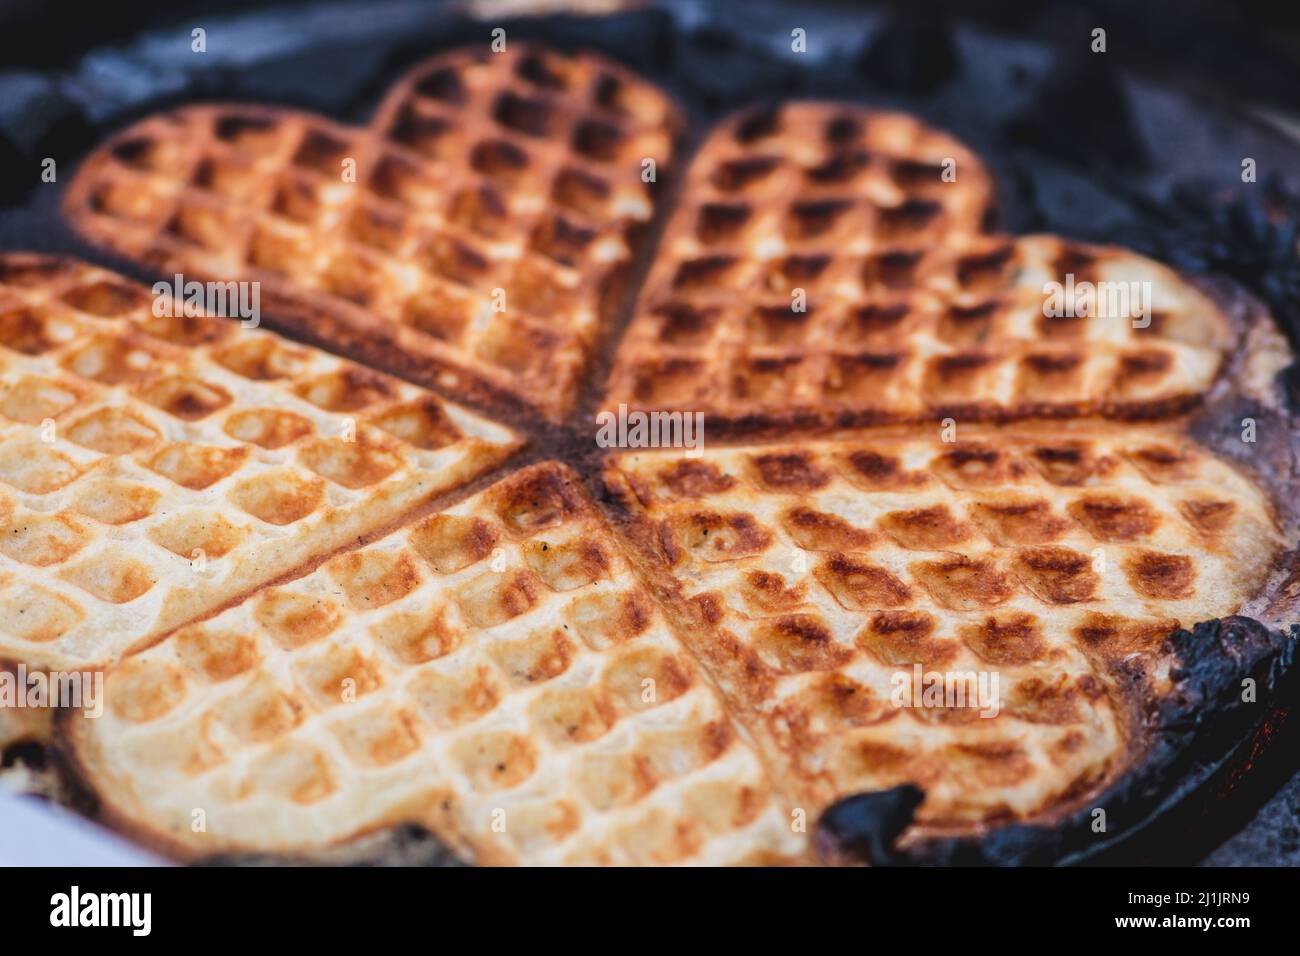 Waffle or waffles in a pan, dish made from leavened batter or dough that is cooked between two plates that are patterned, close up Stock Photo